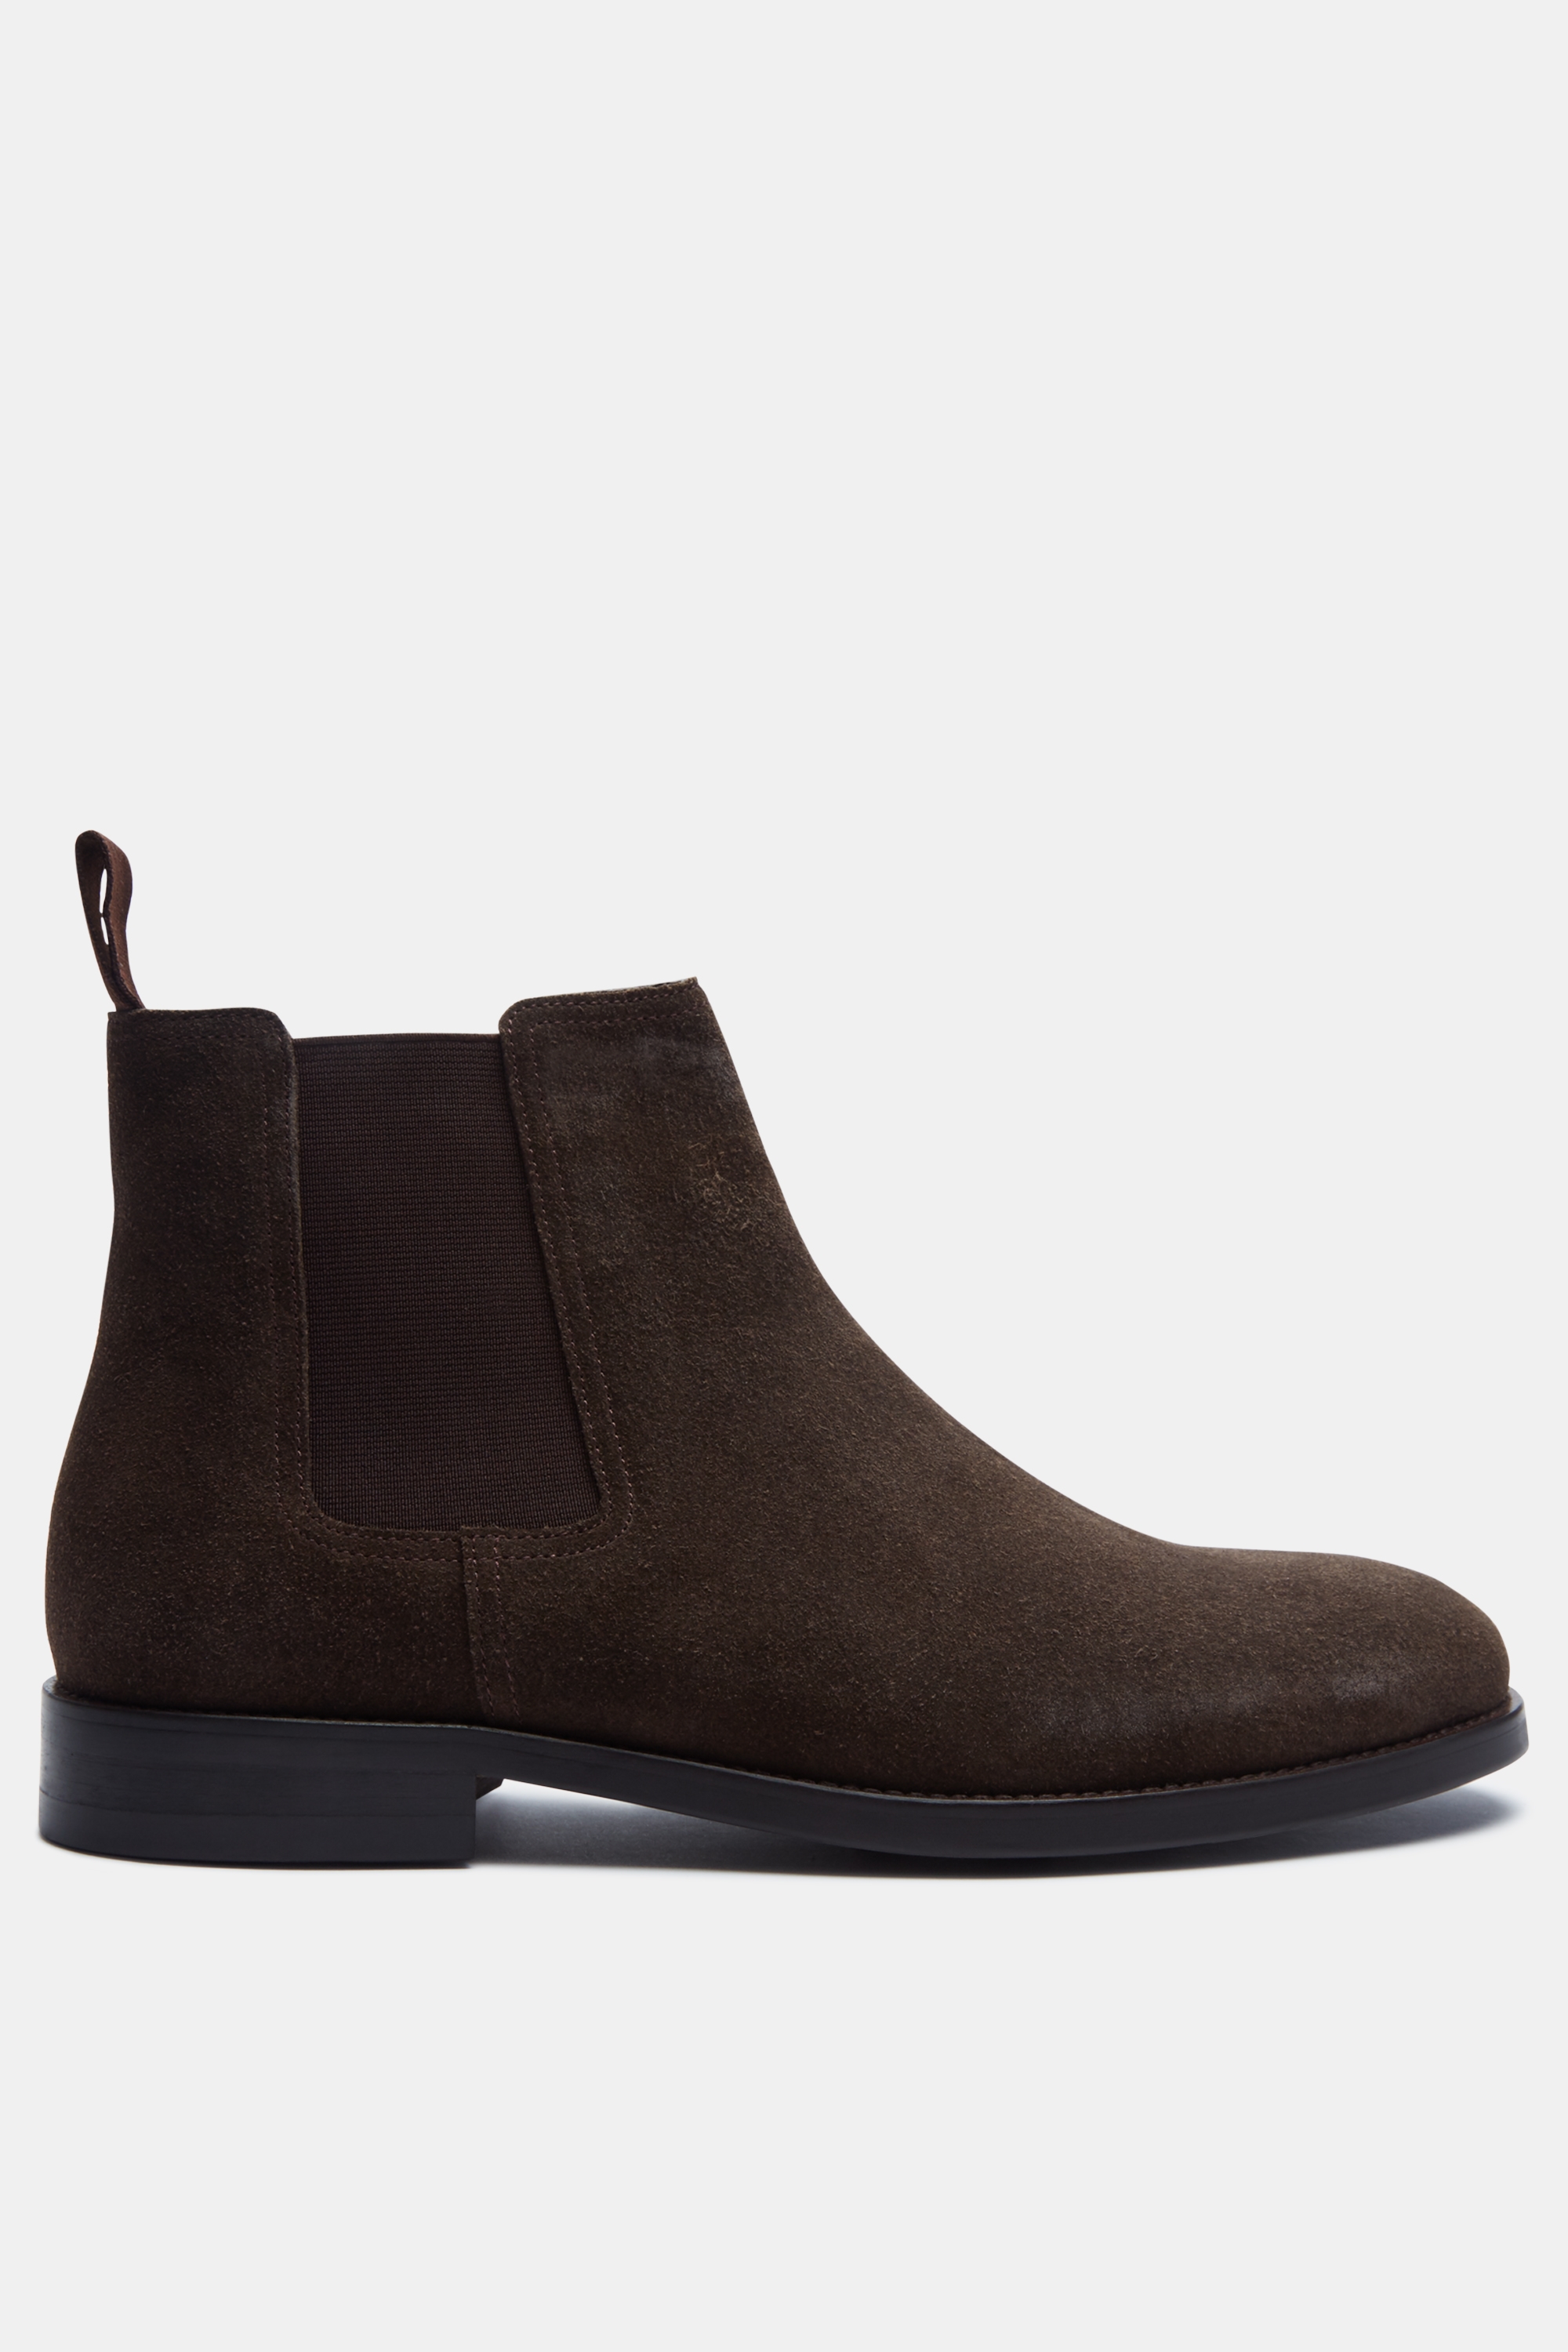 John White Piccadilly Brown Suede 